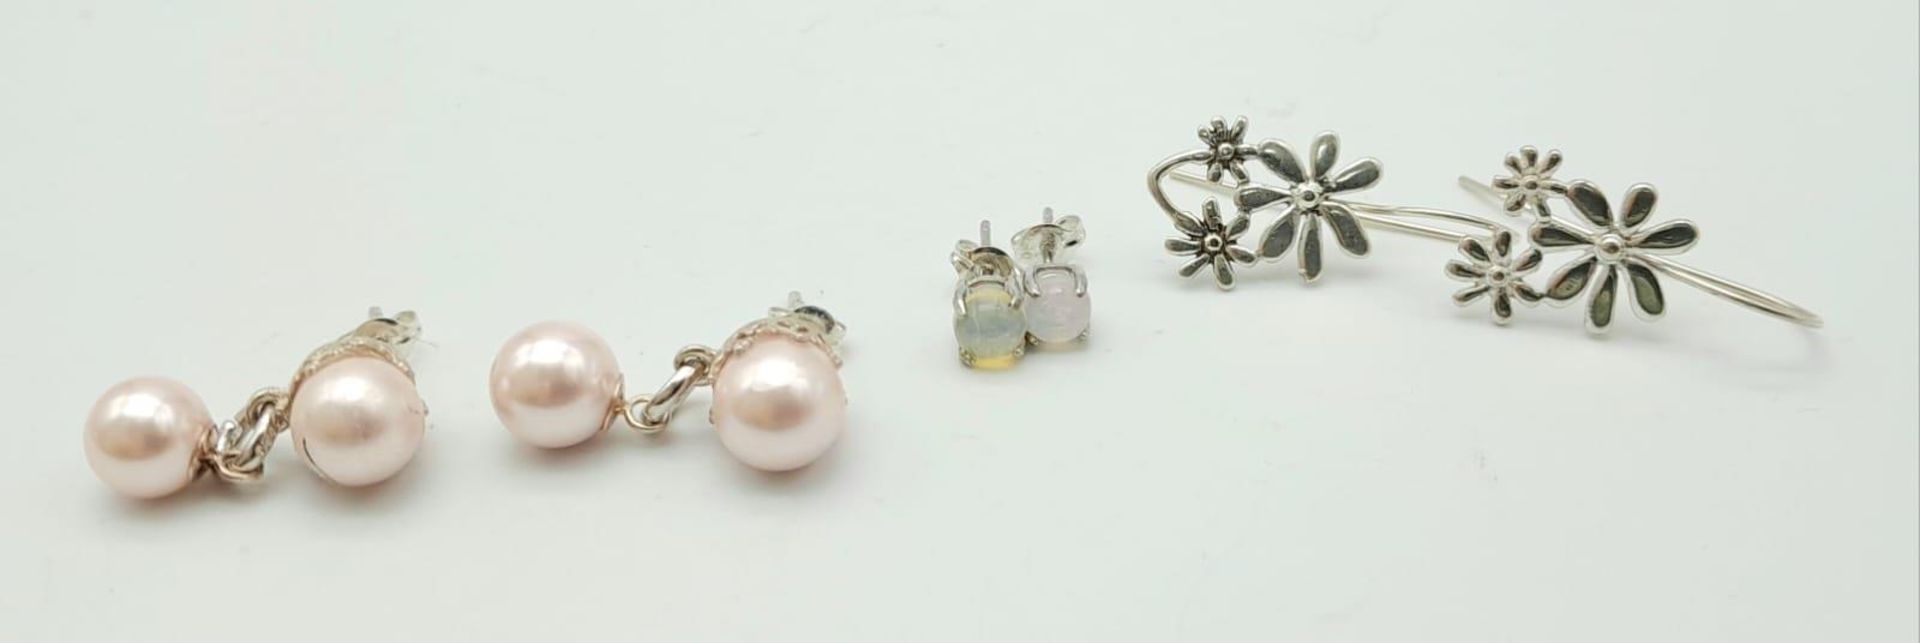 Trio of Sterling Silver Earrings. Featuring pair of double Pink Pearl drops, Floral Silver drops and